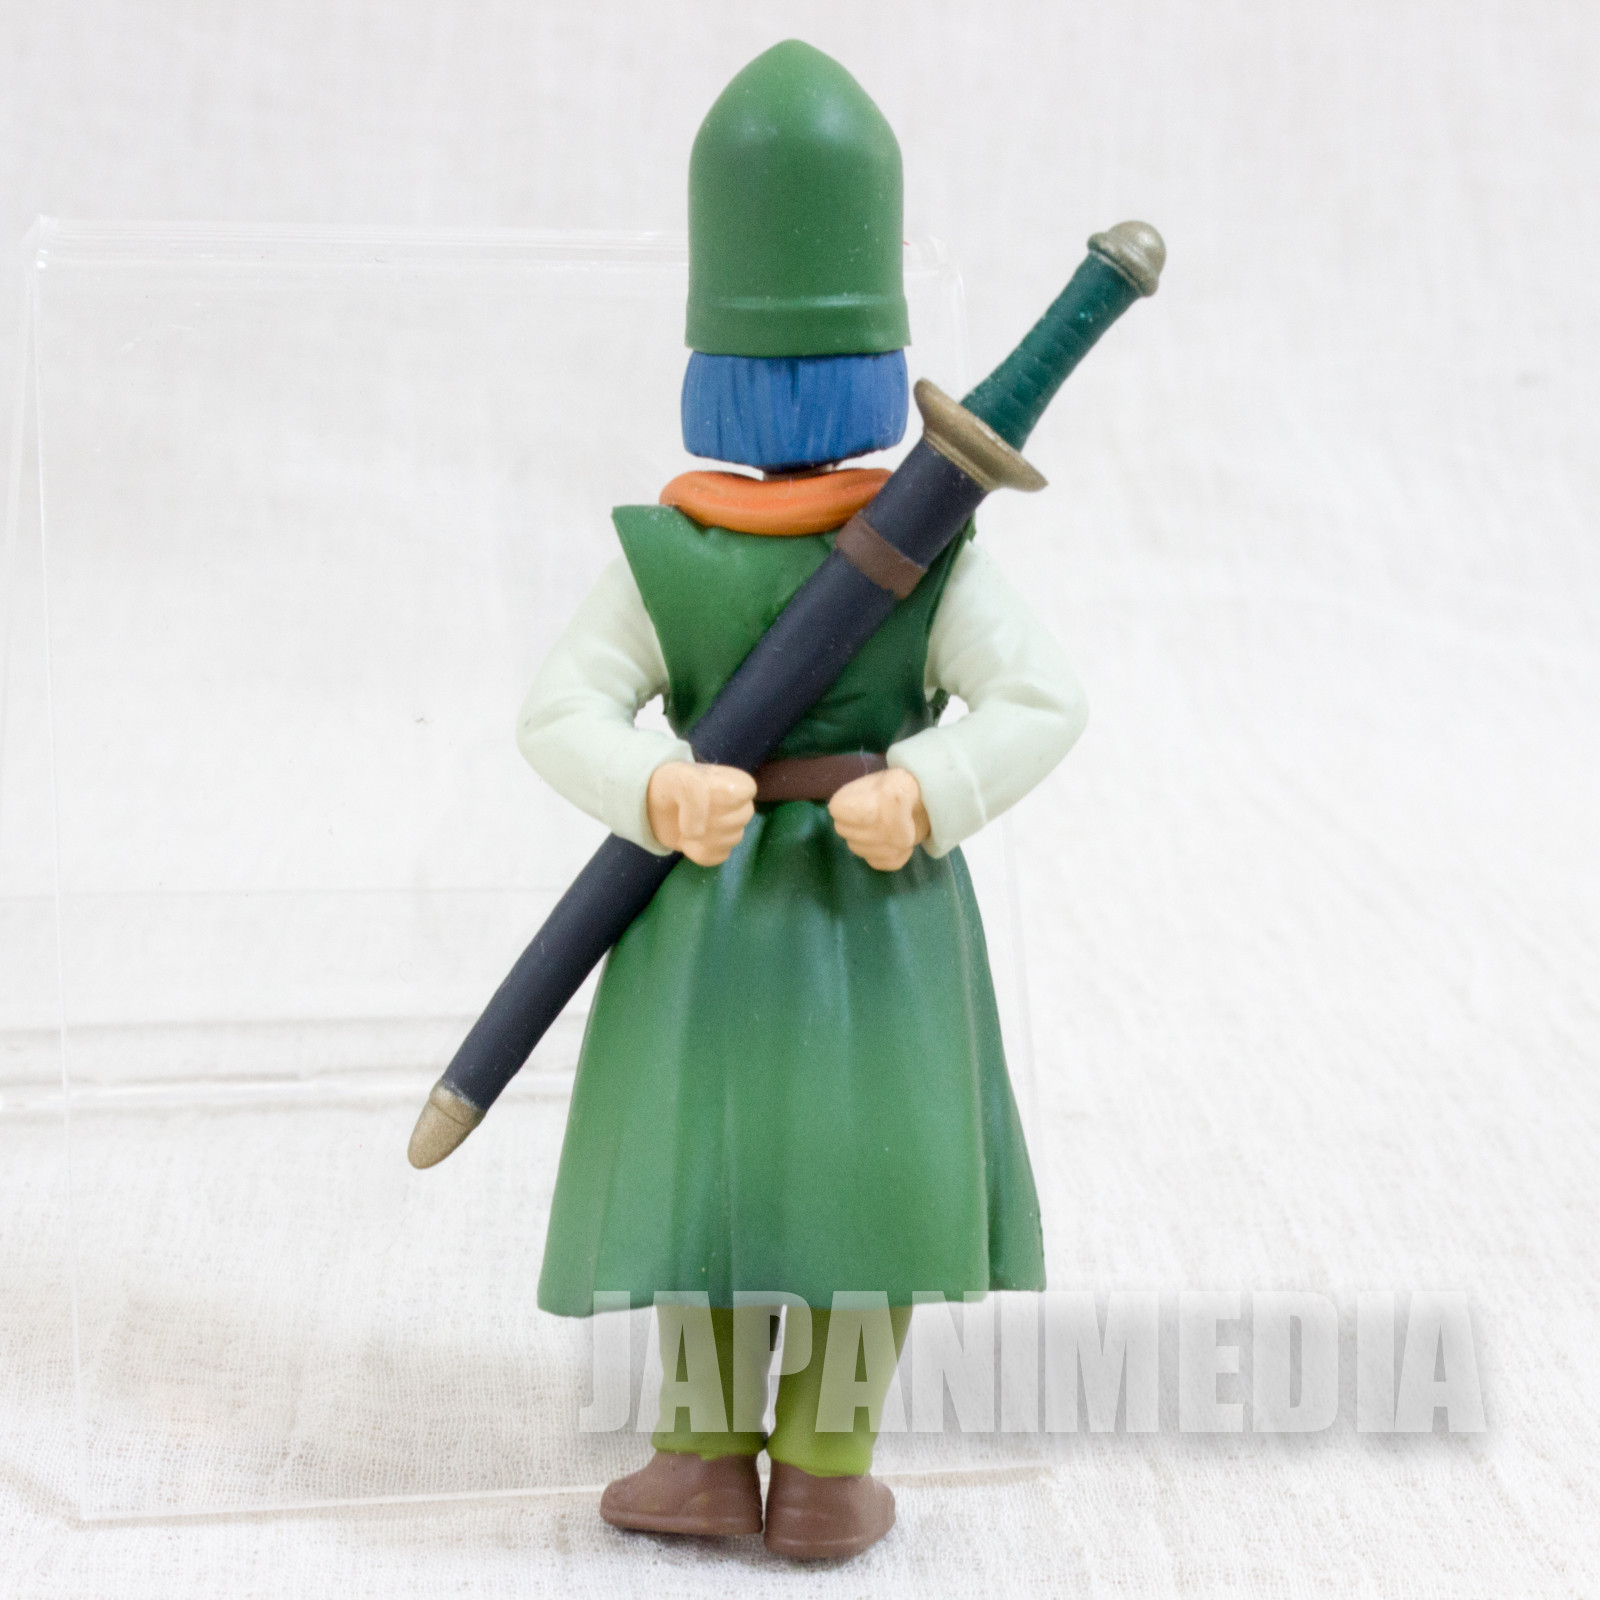 [Stand missing] Dragon Quest Chancellor Kiryl Clift Character Figure Collection JAPAN GAME